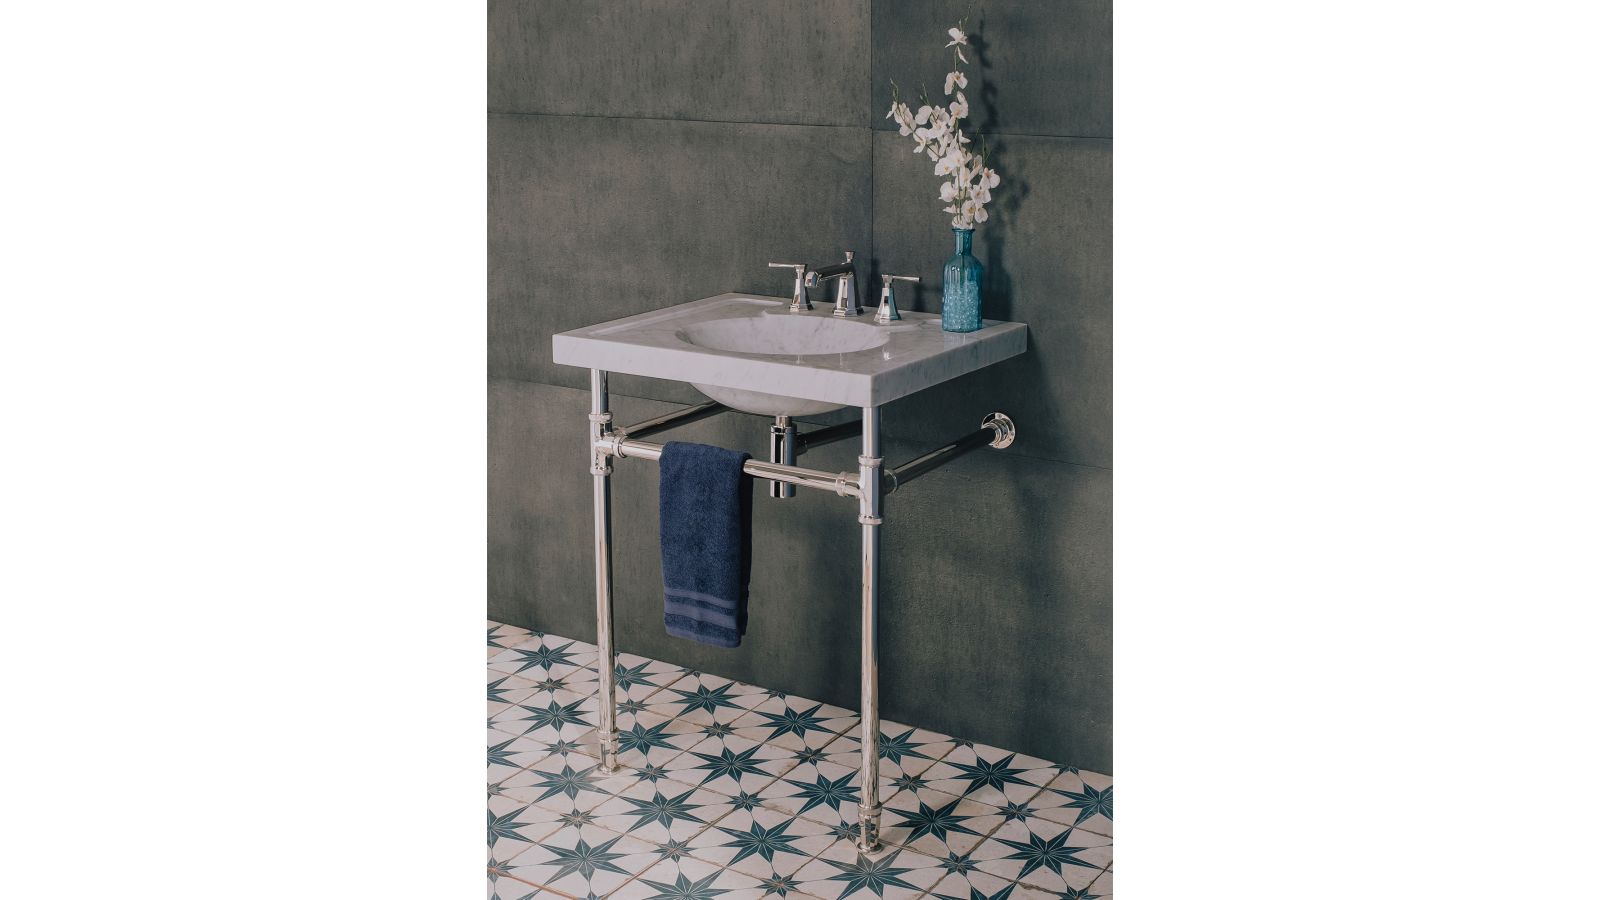 Vintage Washbasin with Elemental Facet Legs with Crossbar